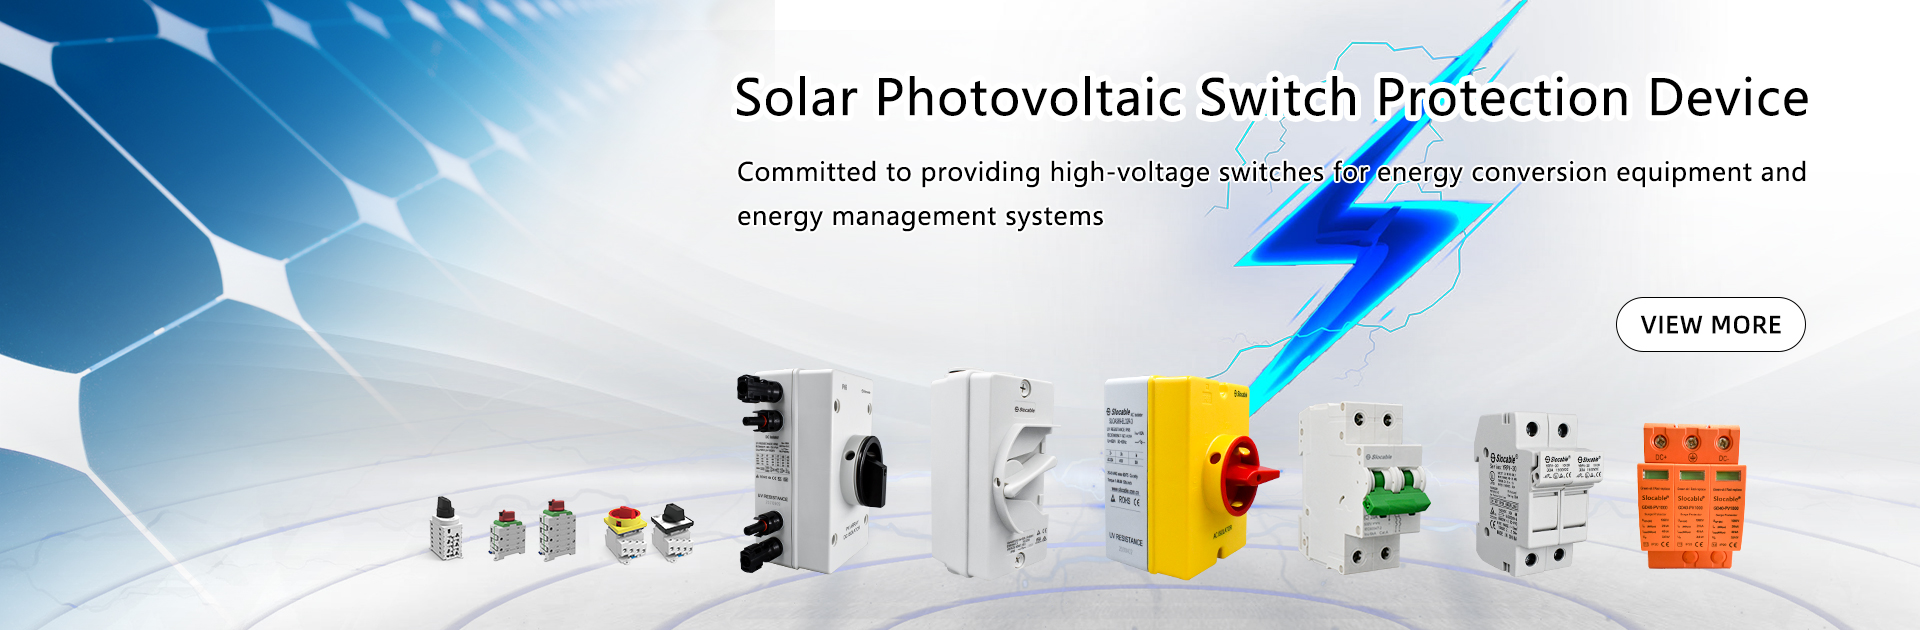 slocable dc solar switch banner